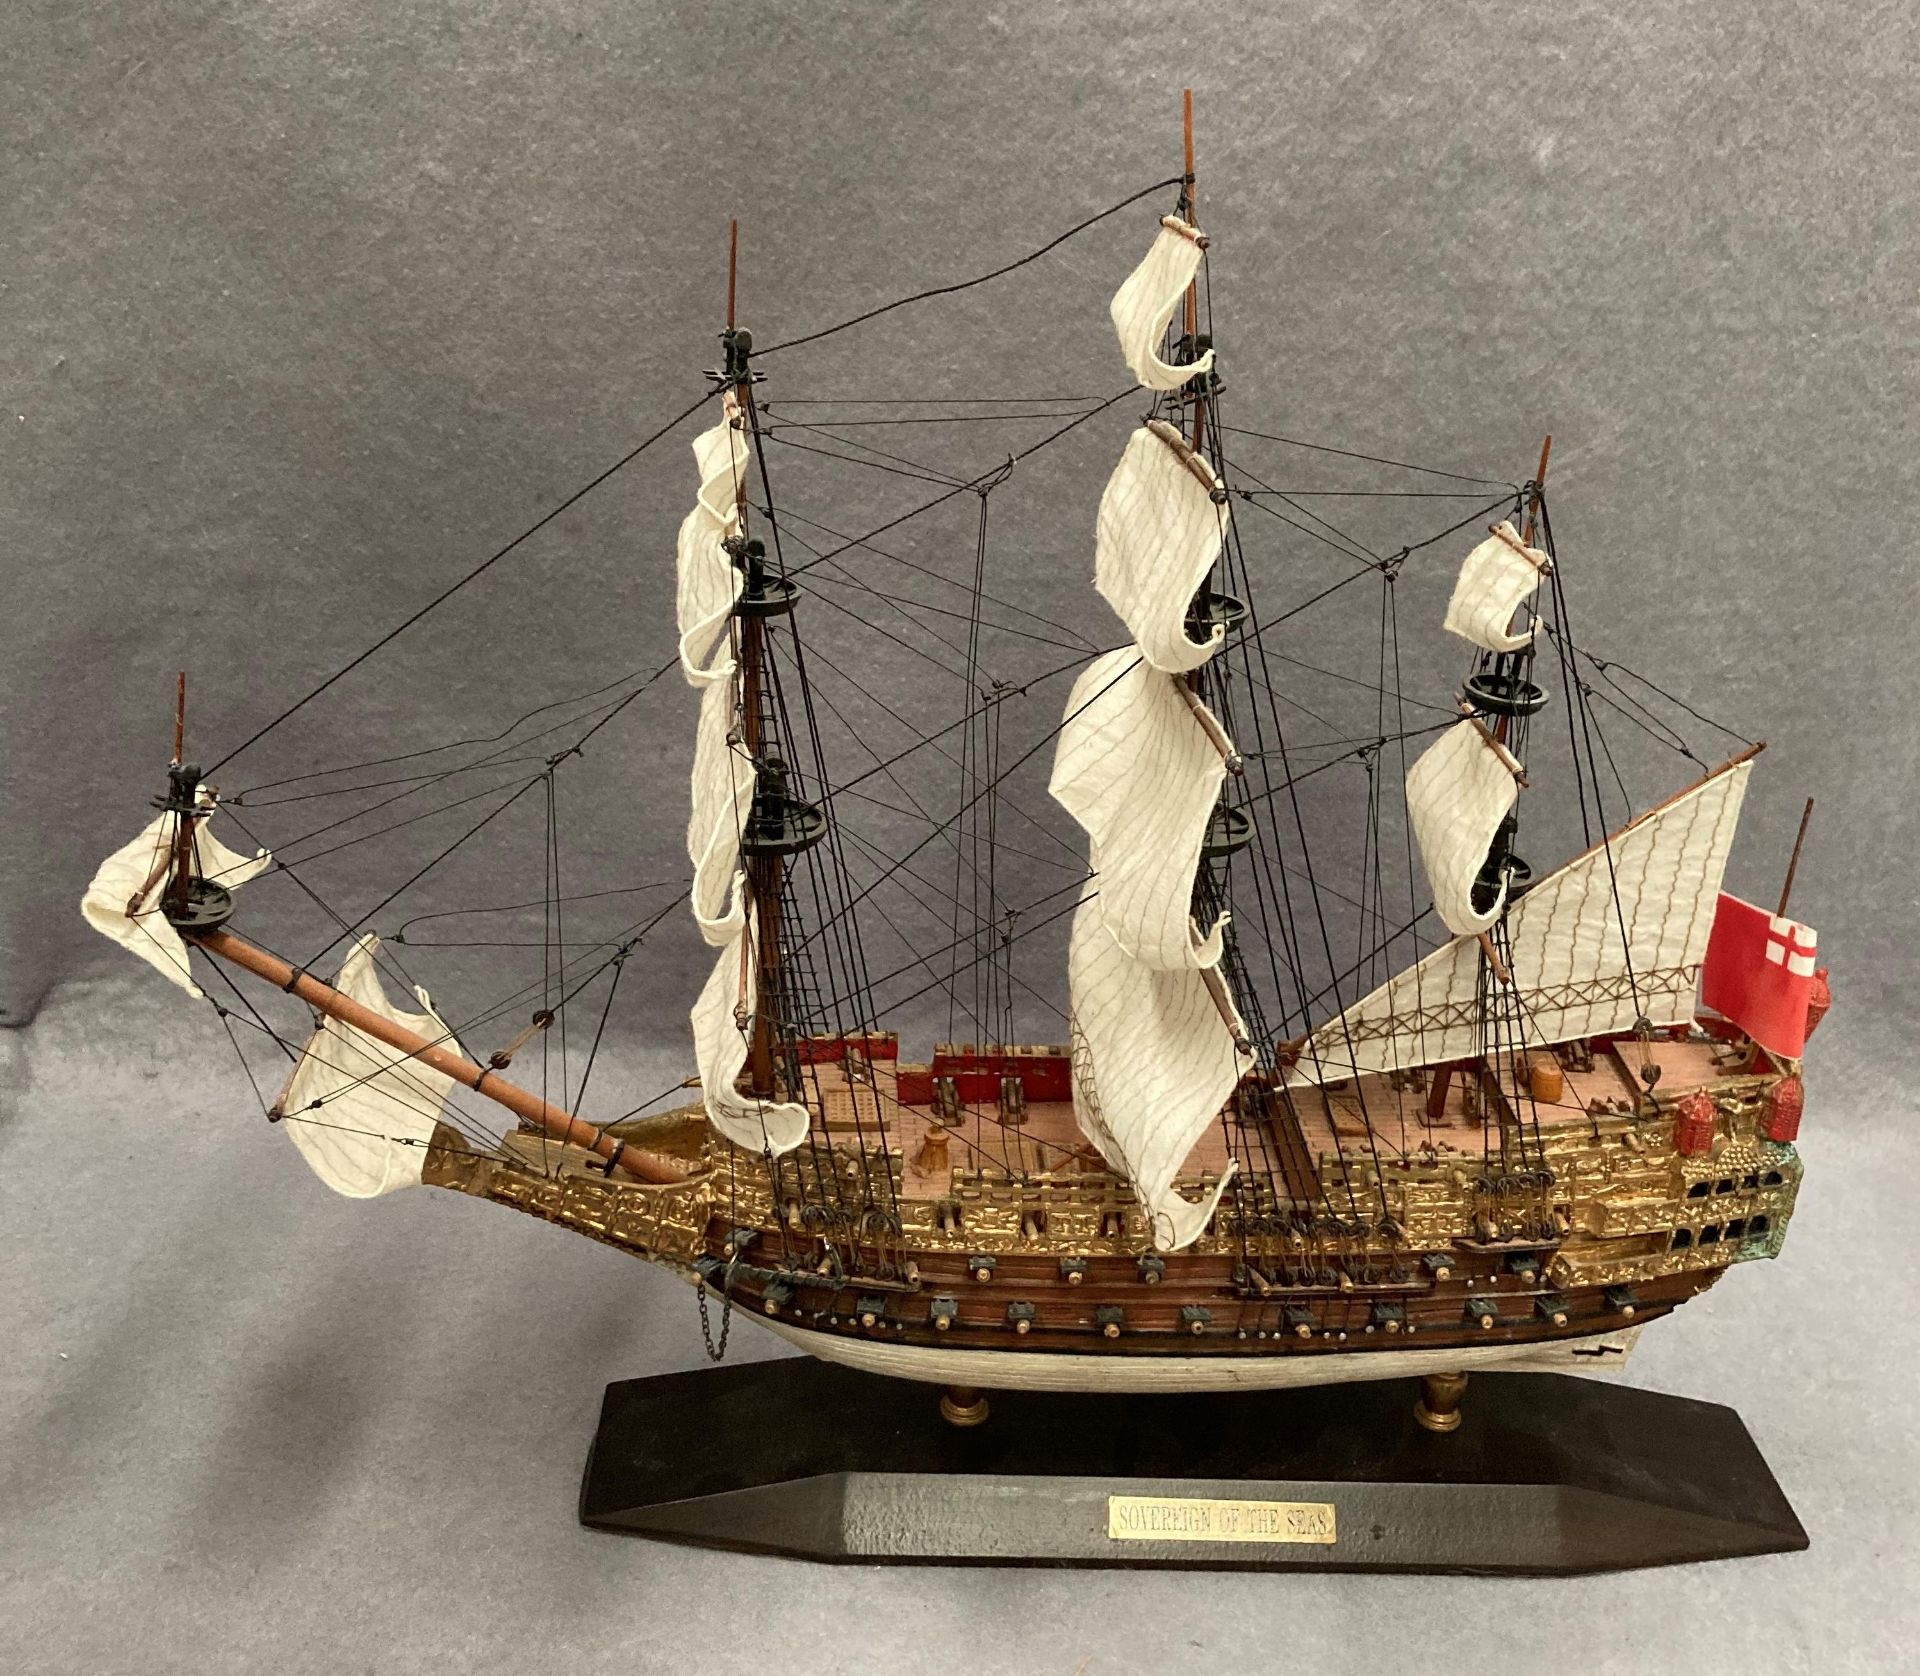 A resin scale model ship Sovereign of the Seas 45cm long and 37cm high